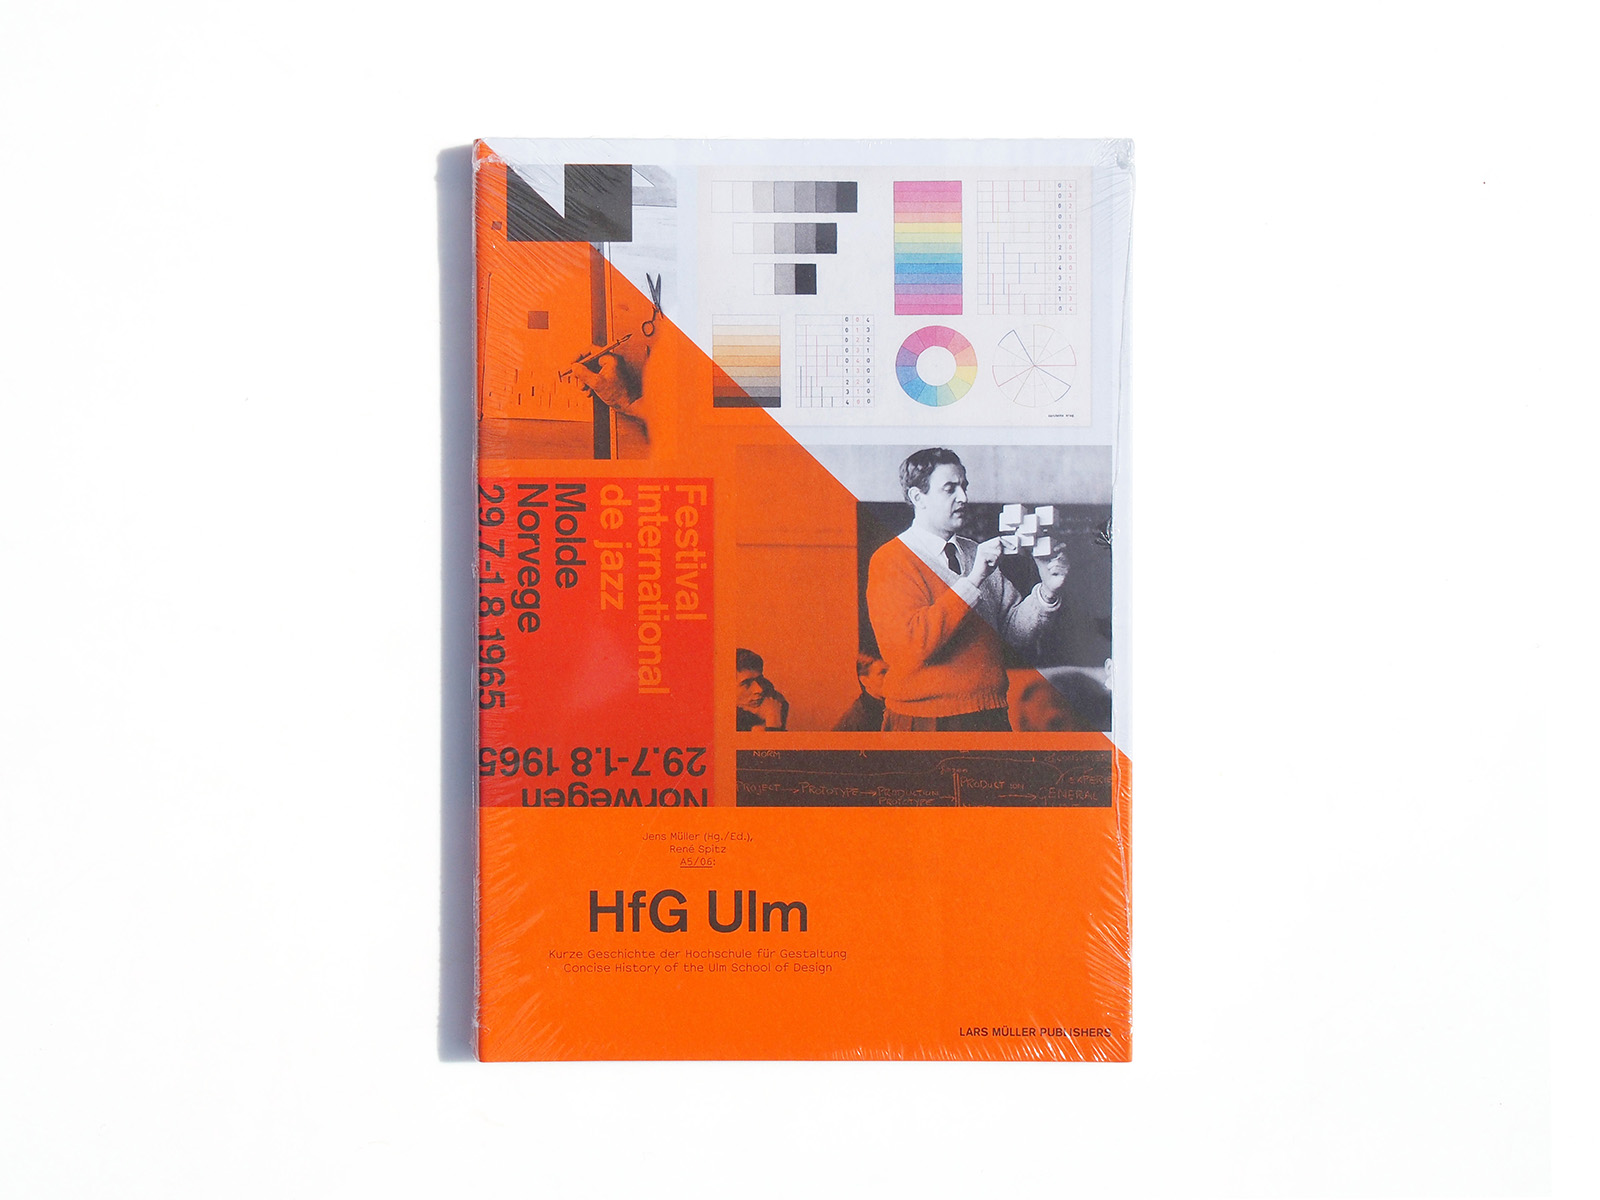 A5/06: HfG Ulm: Concise Hisotry of the Ulm School of Design | SPREAD